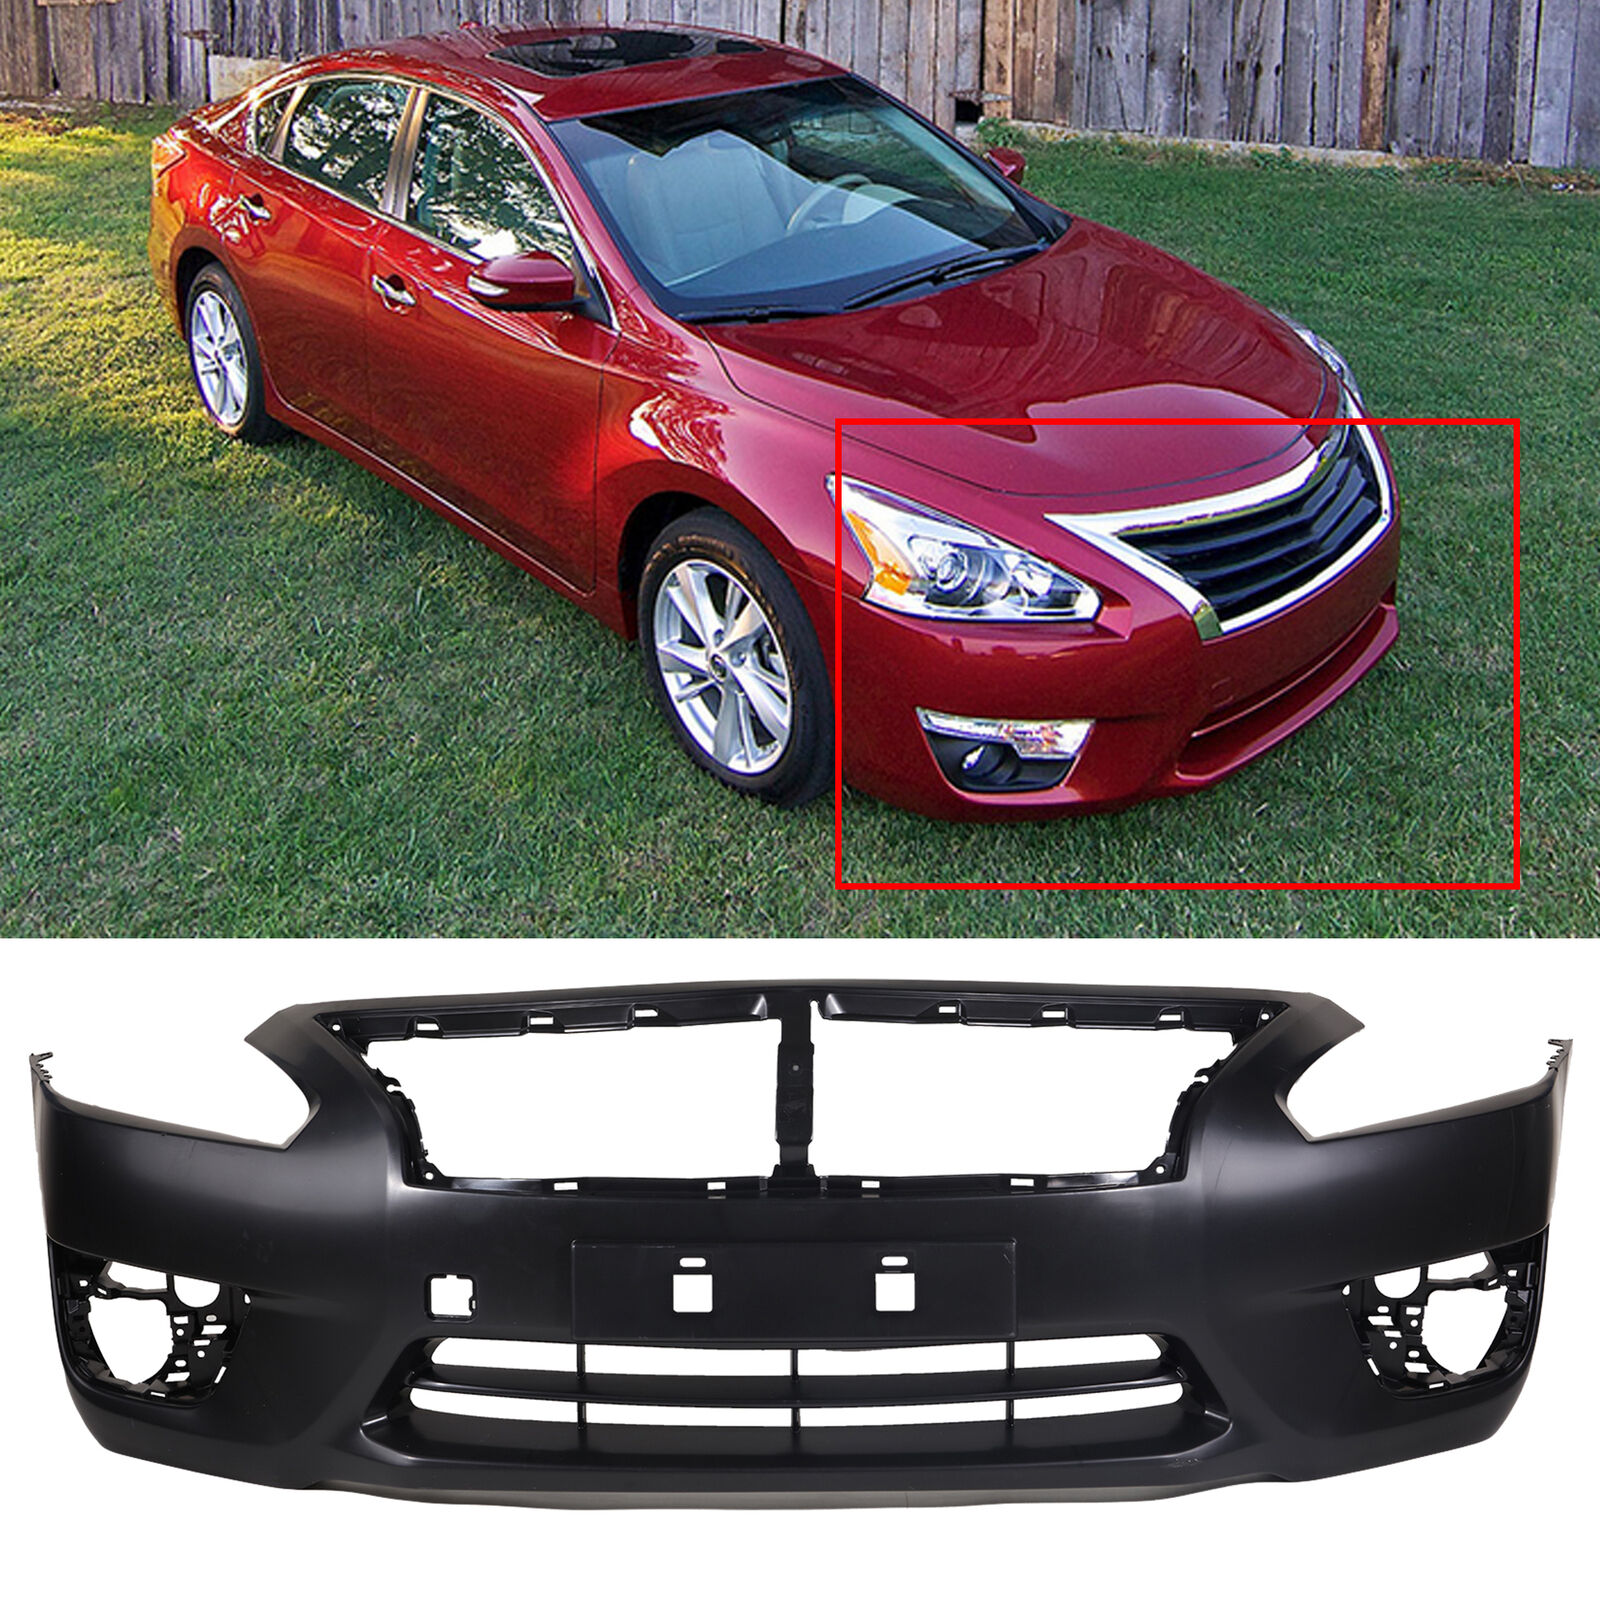 NEW Primered - Front Bumper Cover Fascia Replacement For 2013-2015 Nissan Altima